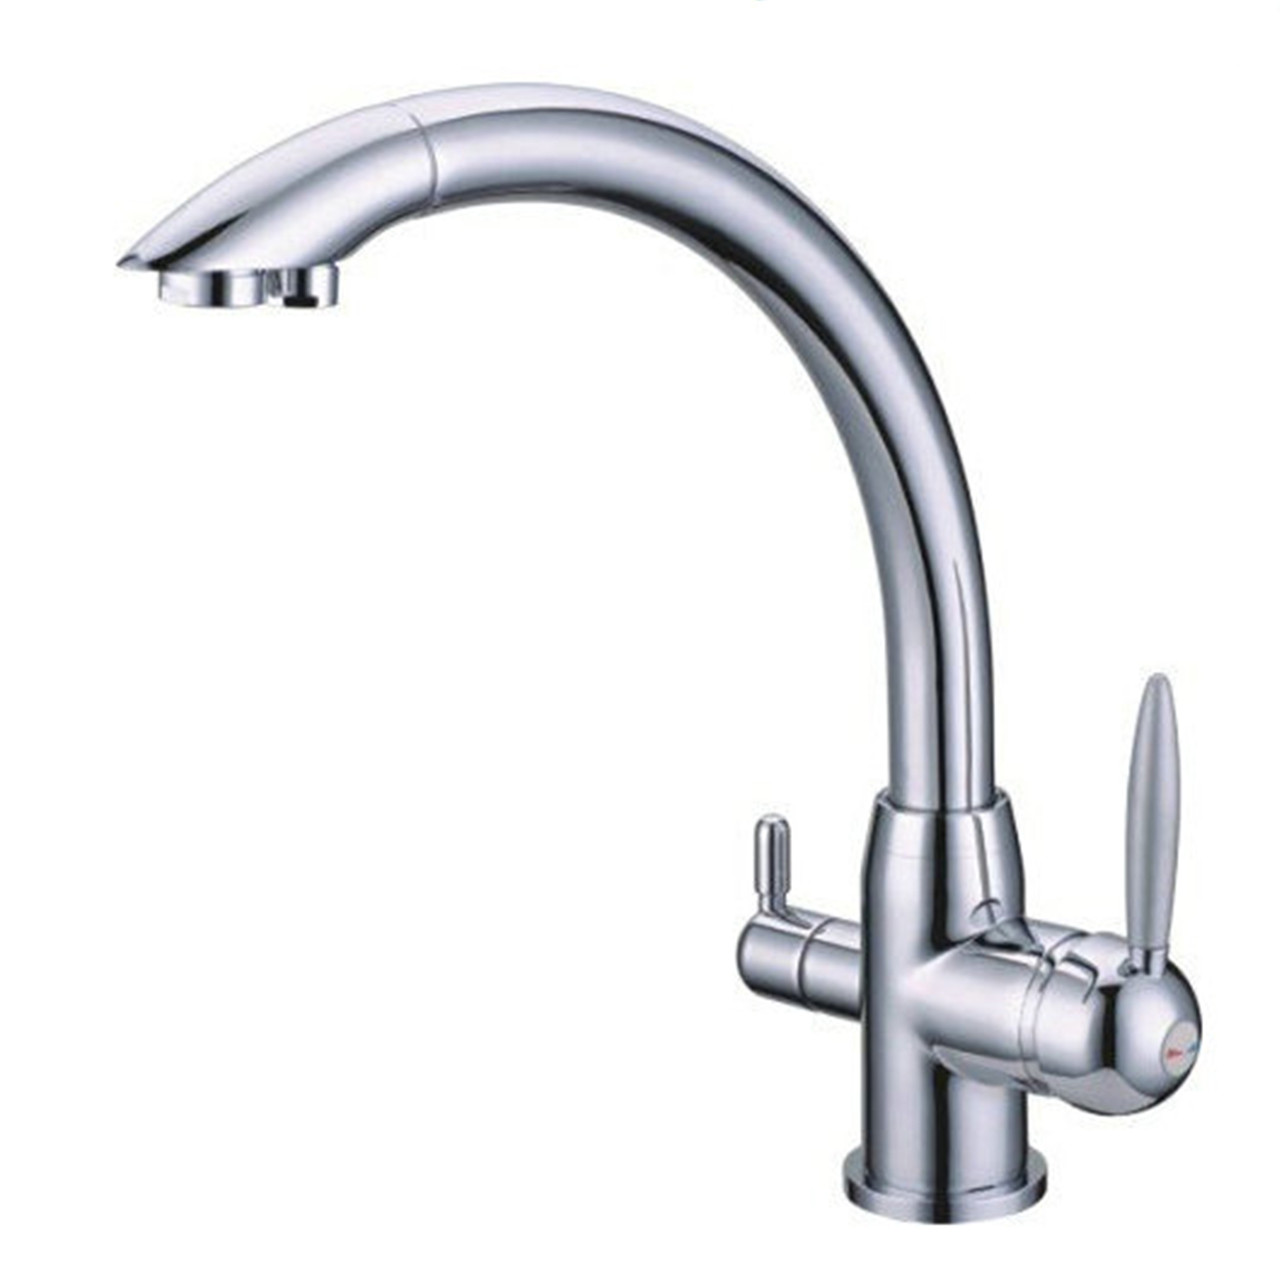 Waterlux Wl 303 Slim Elegant 3 Way Hot Cold Kitchen Faucet For Ro